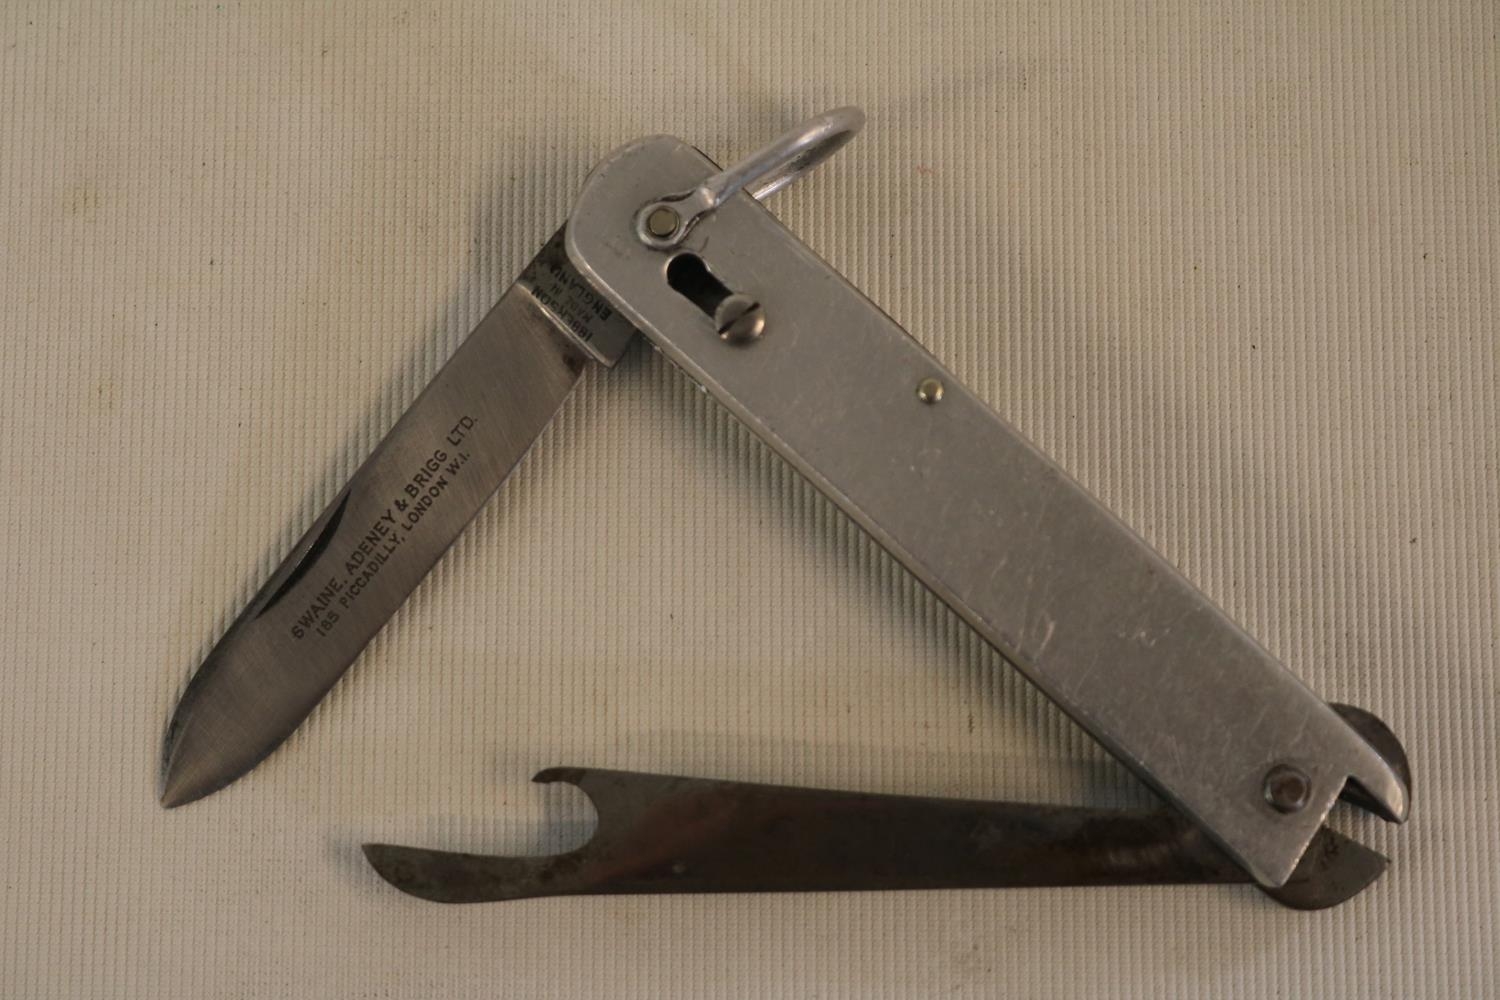 Swaine Adeney & Brigg Ltd Hunting Dog Nail clipper and Pocket knife with Ibberson Blade 11cm in - Image 2 of 4